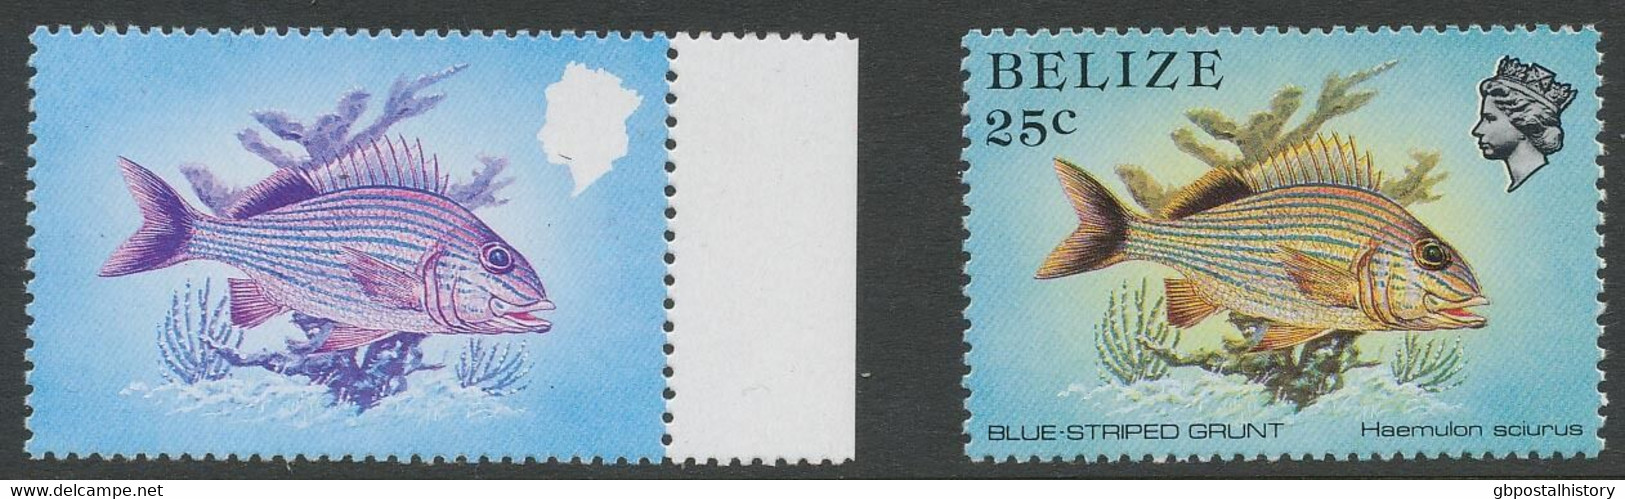 BELIZE 1984 25 C. Fish Superb U/M VARIETY: MSSING COLOURS BLACK AND YELLOW - Belize